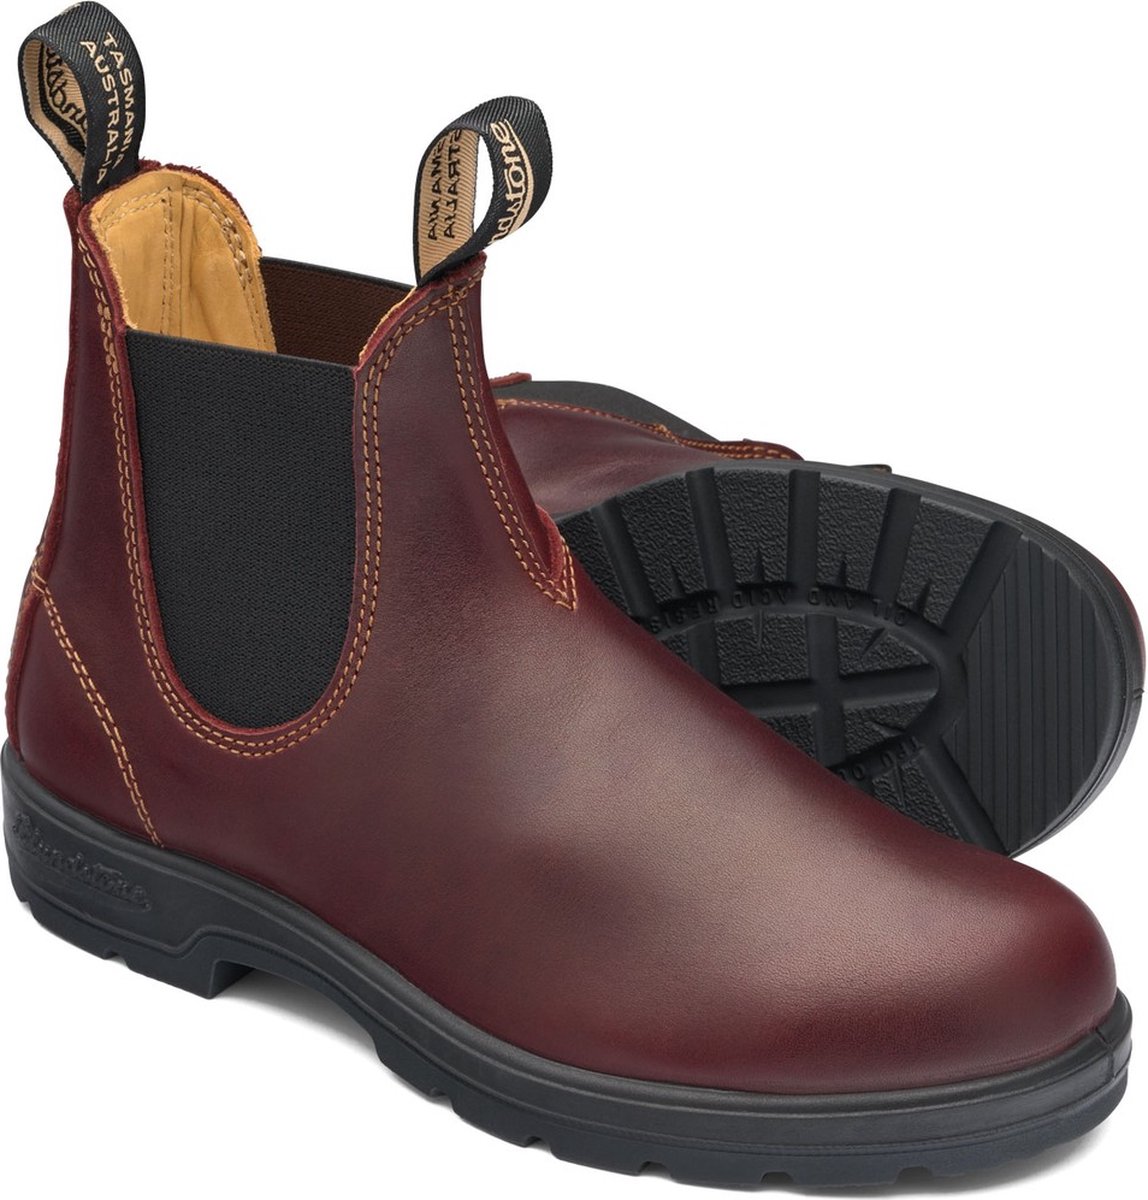 Blundstone Stiefel Boots #1440 Leather (550 Series) Redwood-10.5UK